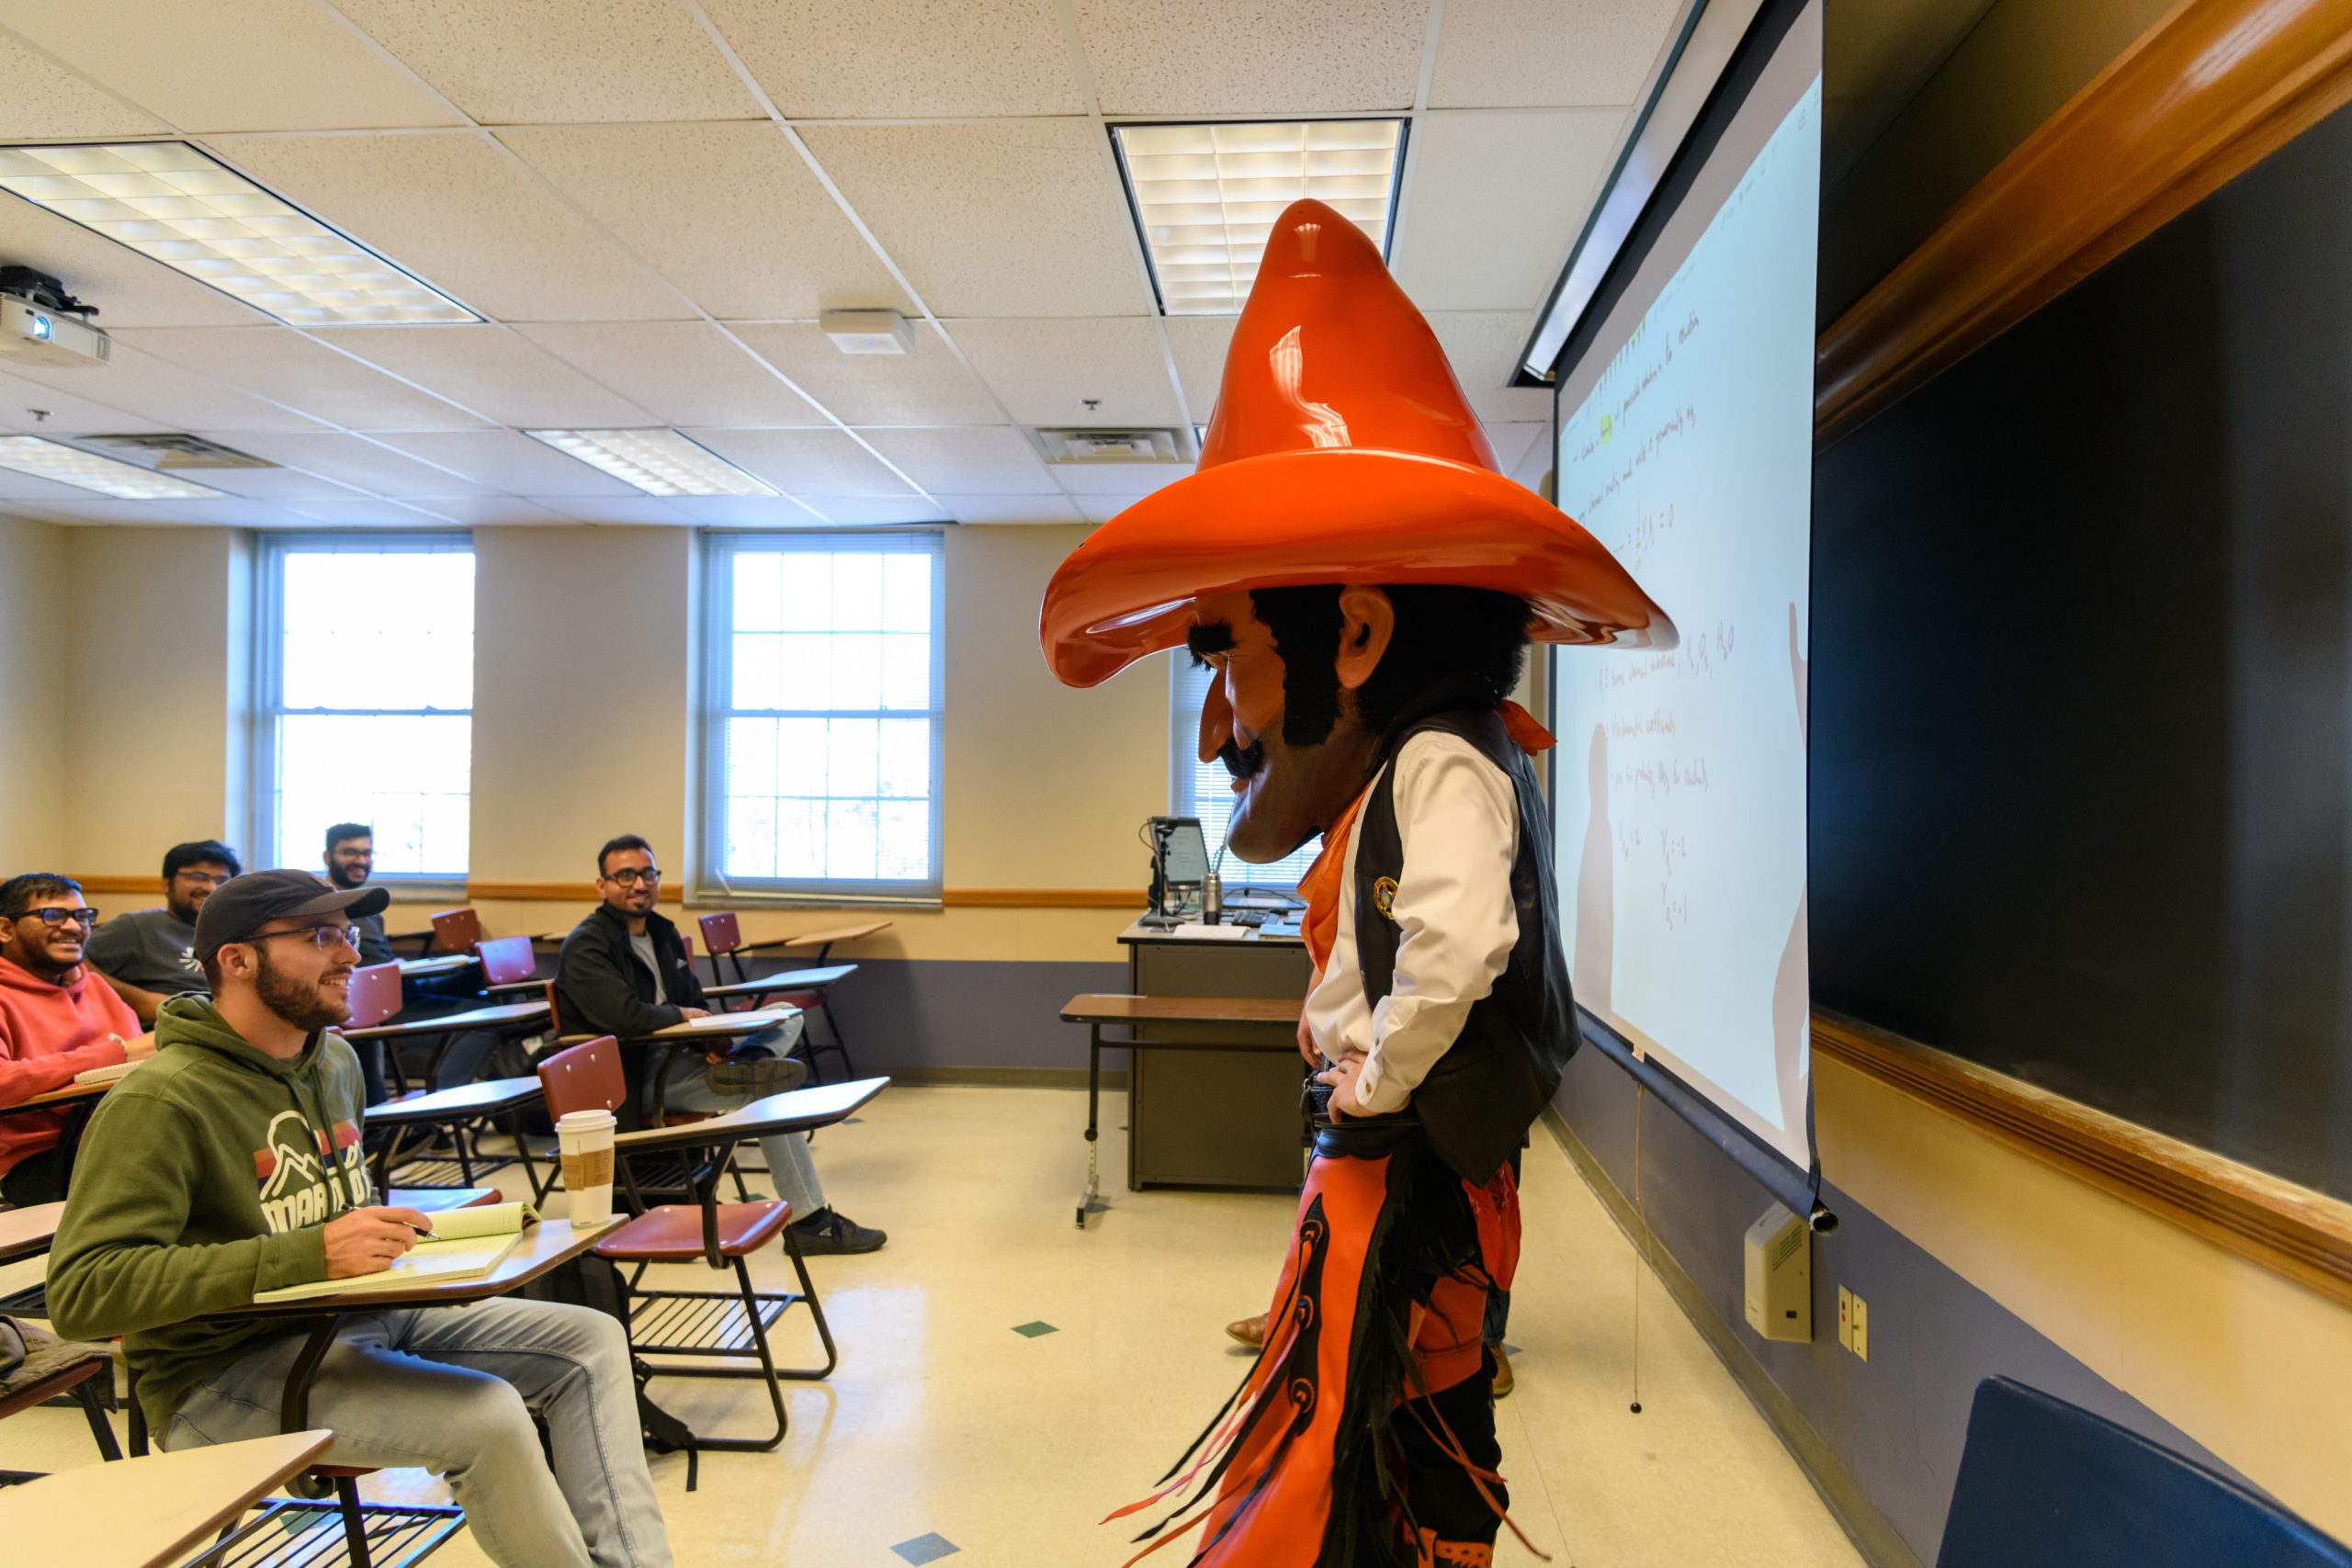 Pistol Pete lecturing in front of a classroom of students with his notes on the projector screen.